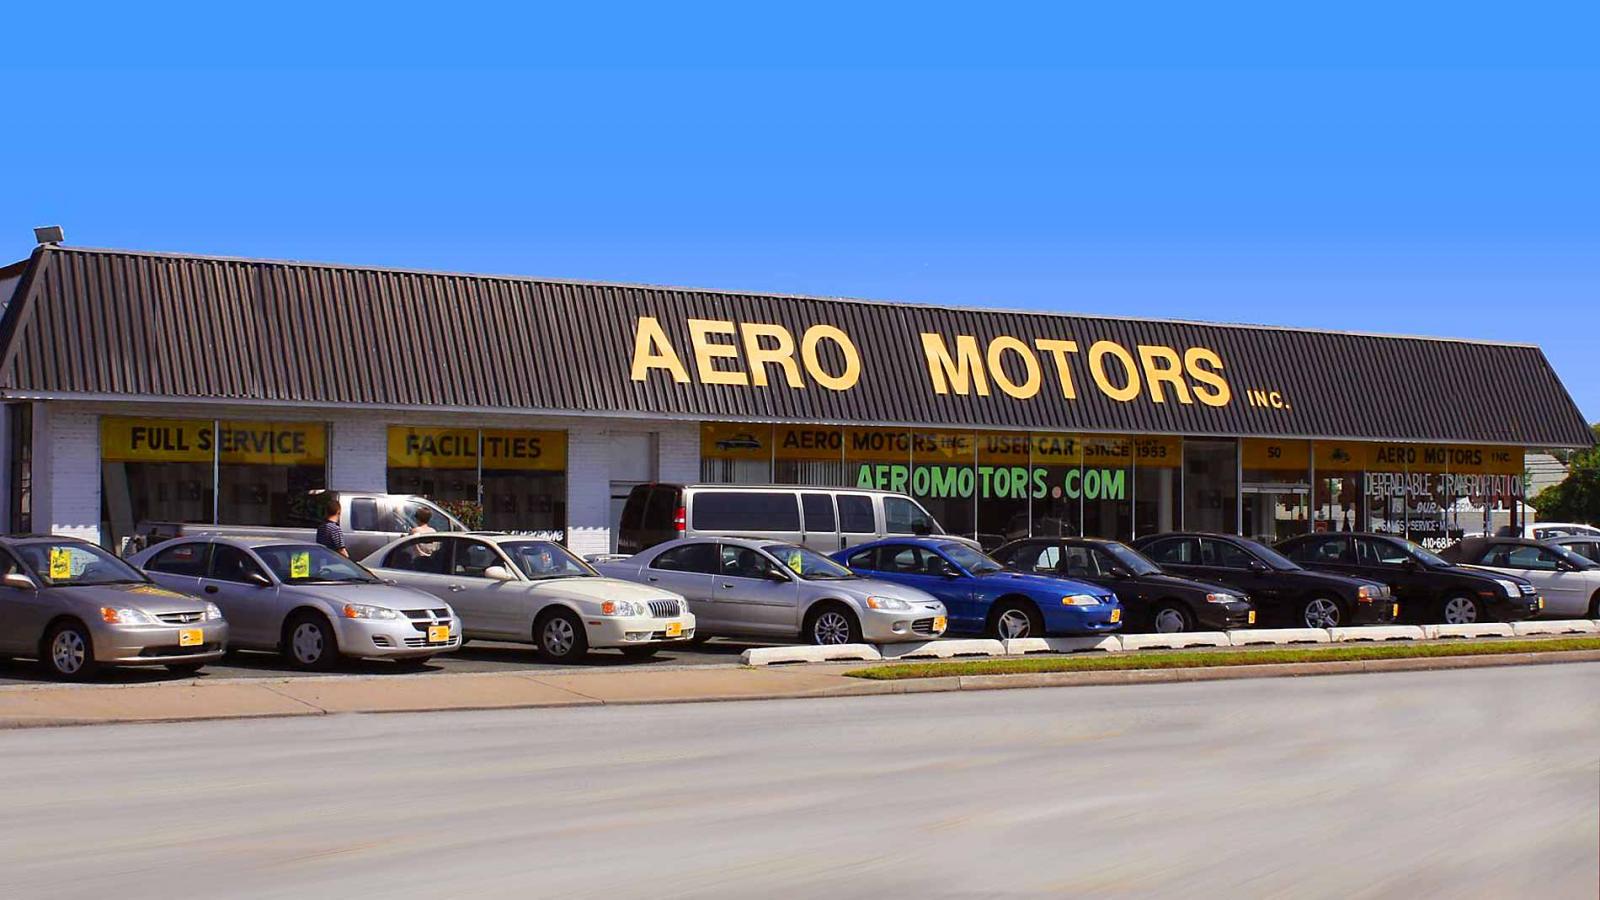 Aero Motors Used Cars Sale Essex MD | Used BHPH Essex MD, Bad Credit Car Loans Baltimore MD, Pre-Owned Auto Sales Rosedale MD, In House Car Financing MD, Special